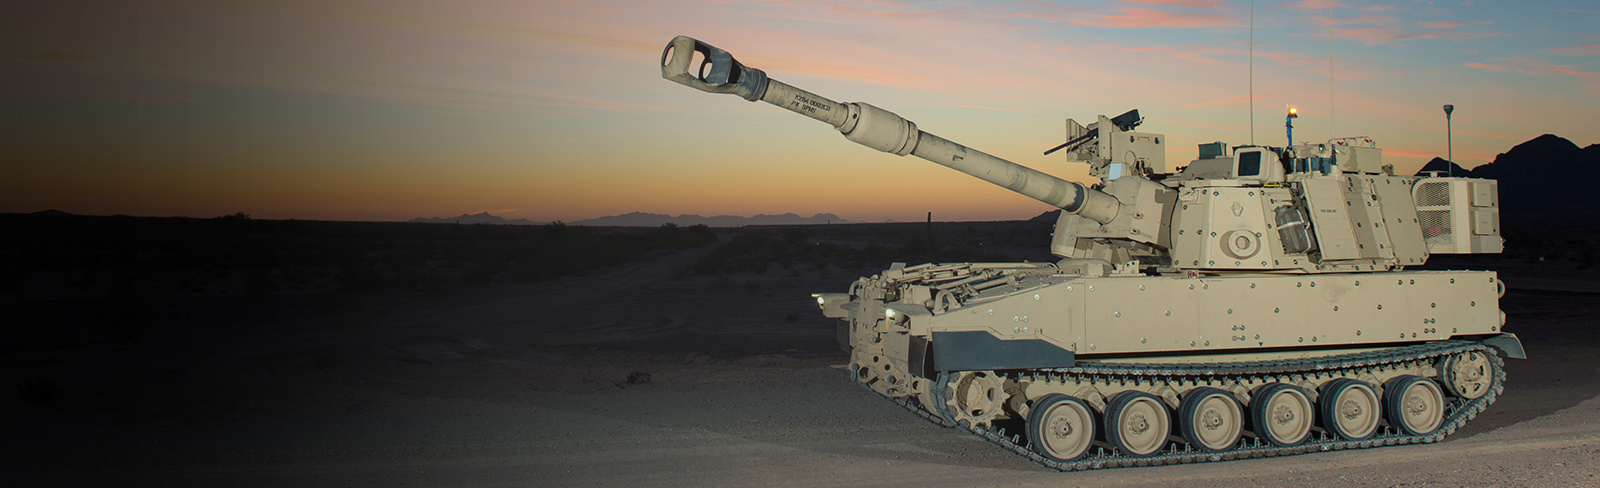 M109A7 at sunset